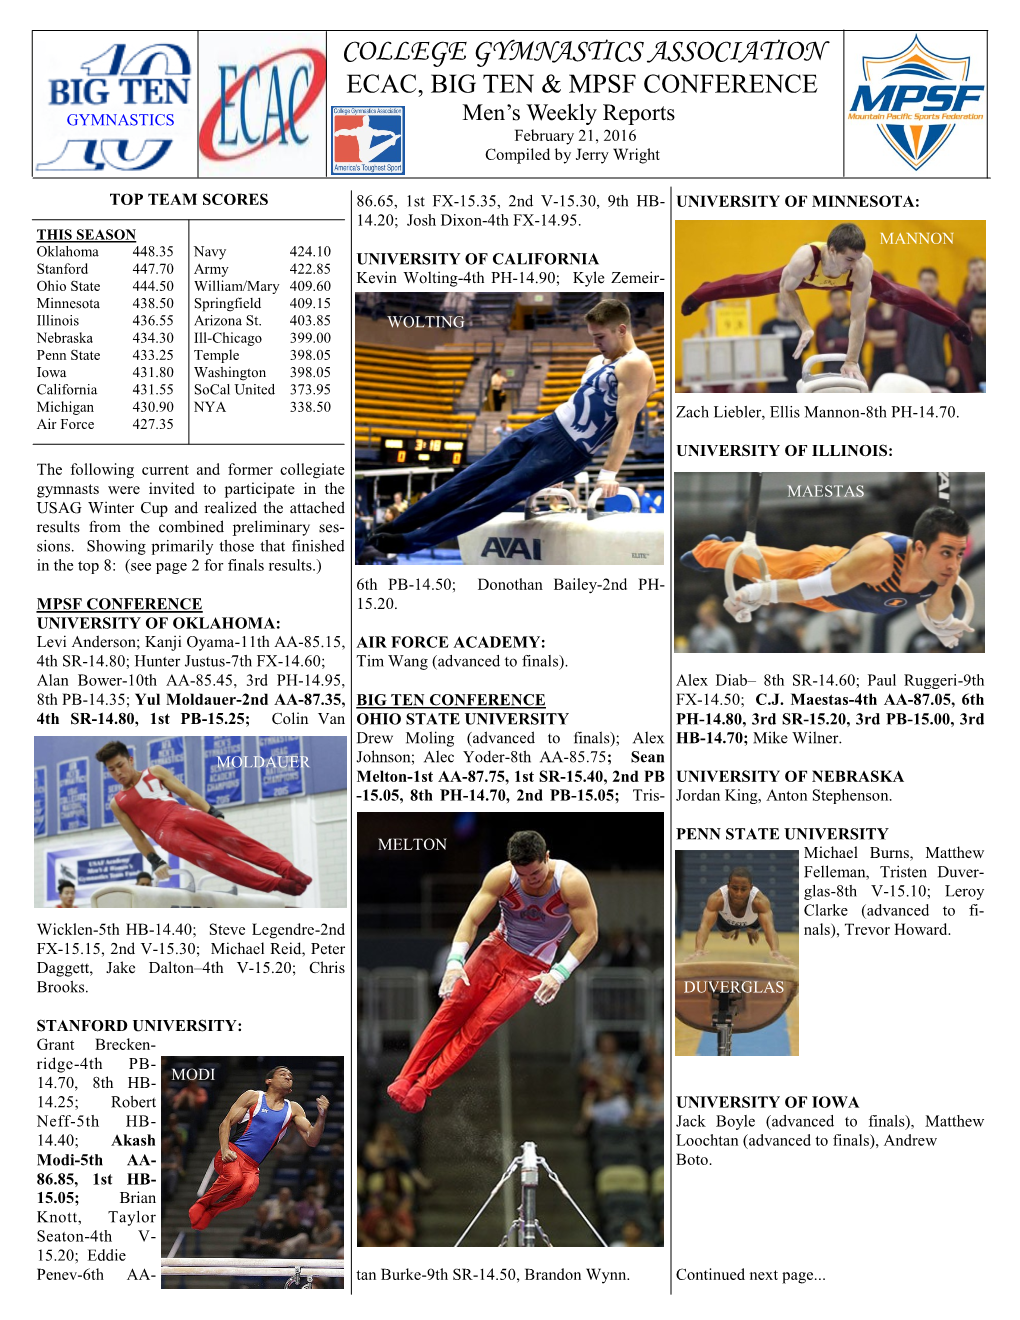 COLLEGE GYMNASTICS ASSOCIATION ECAC, BIG TEN & MPSF CONFERENCE GYMNASTICS Men’S Weekly Reports February 21, 2016 Compiled by Jerry Wright